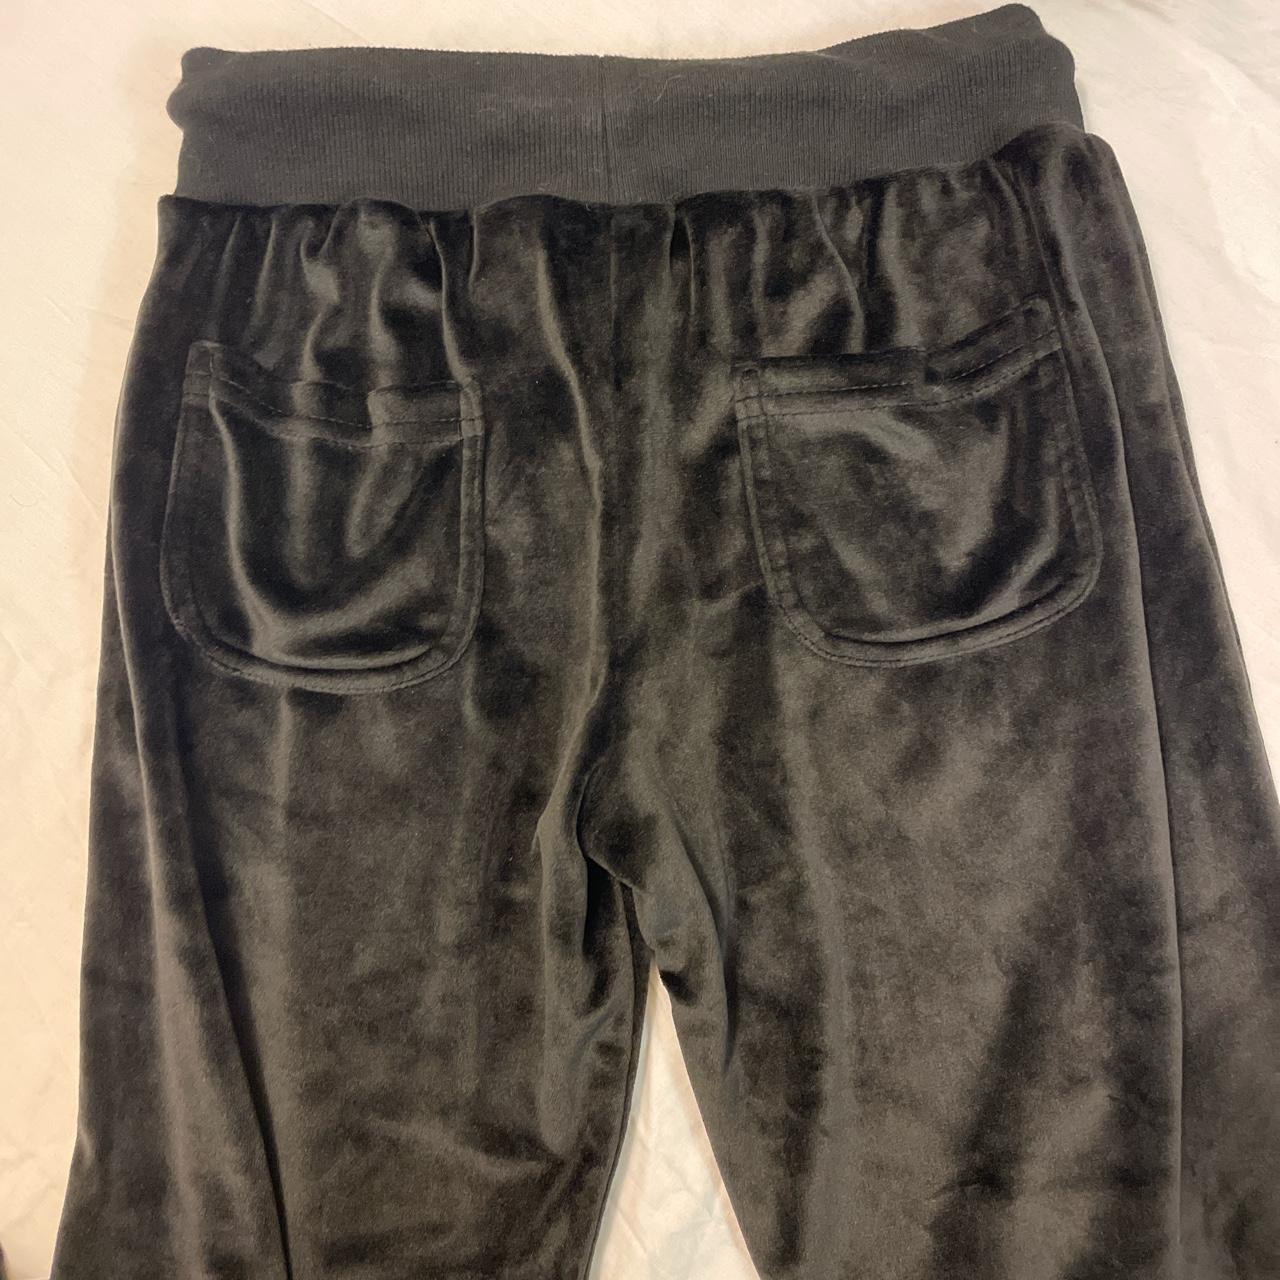 Subdued Chenille Flare Pants Black *THEY ARE THE... - Depop